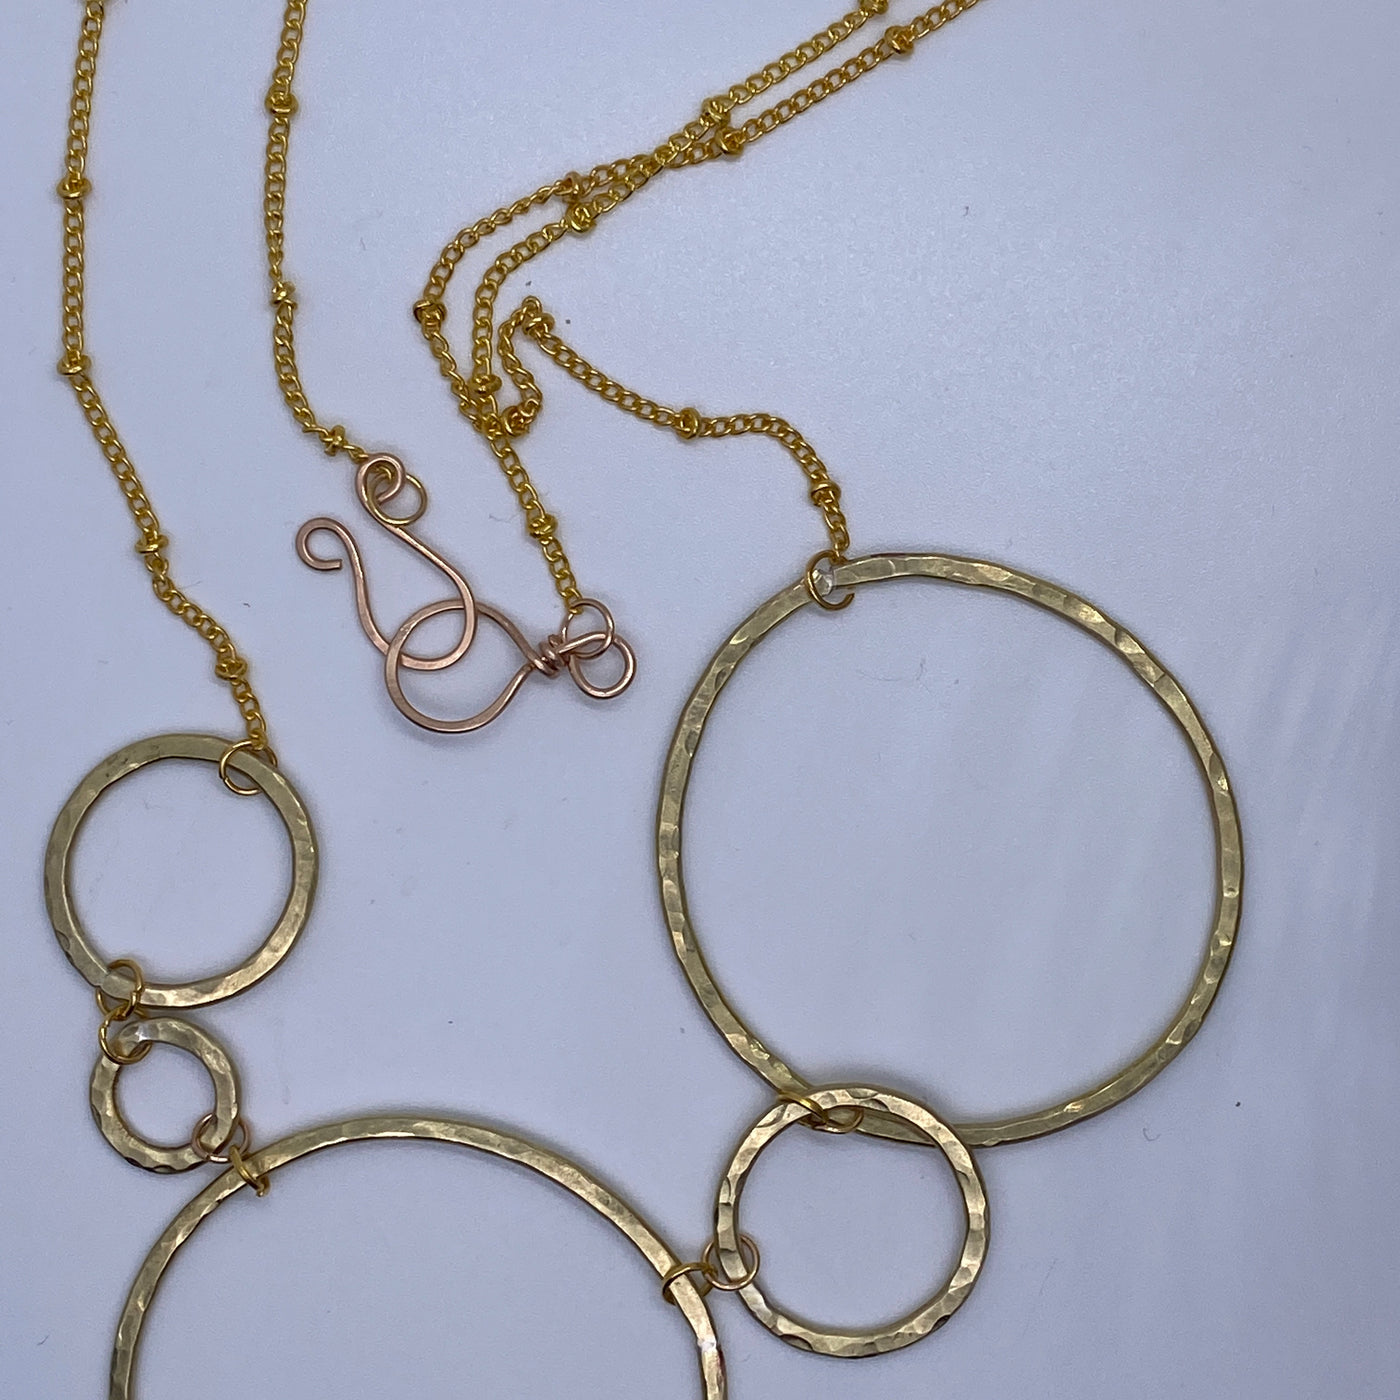 Brass circle texturized necklace on chain